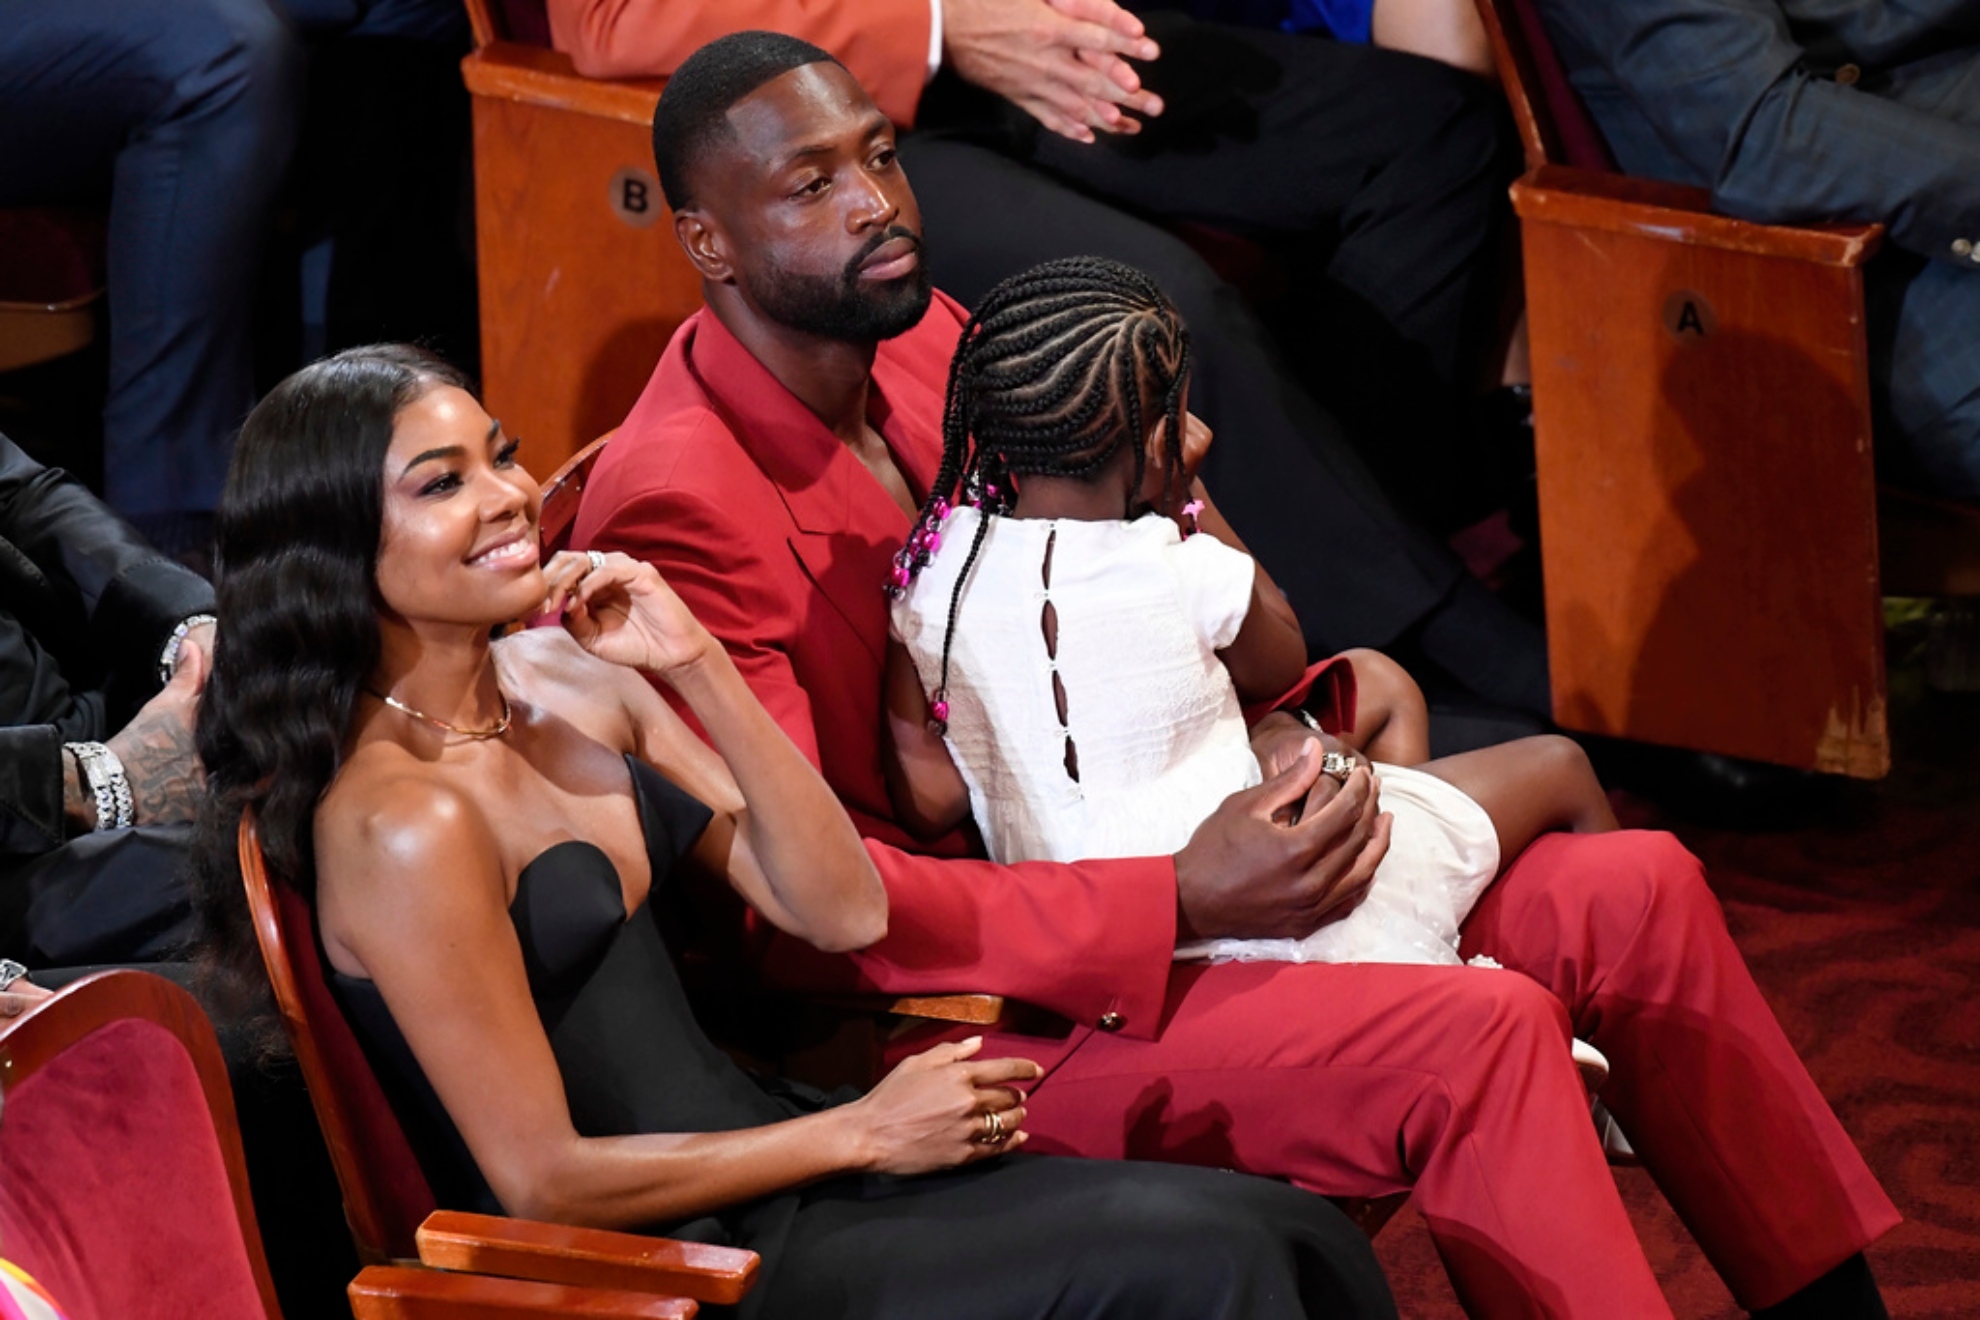 Dwyane Wade tried to end things with Gabrielle Union before telling her about his baby with Aja Metoyer